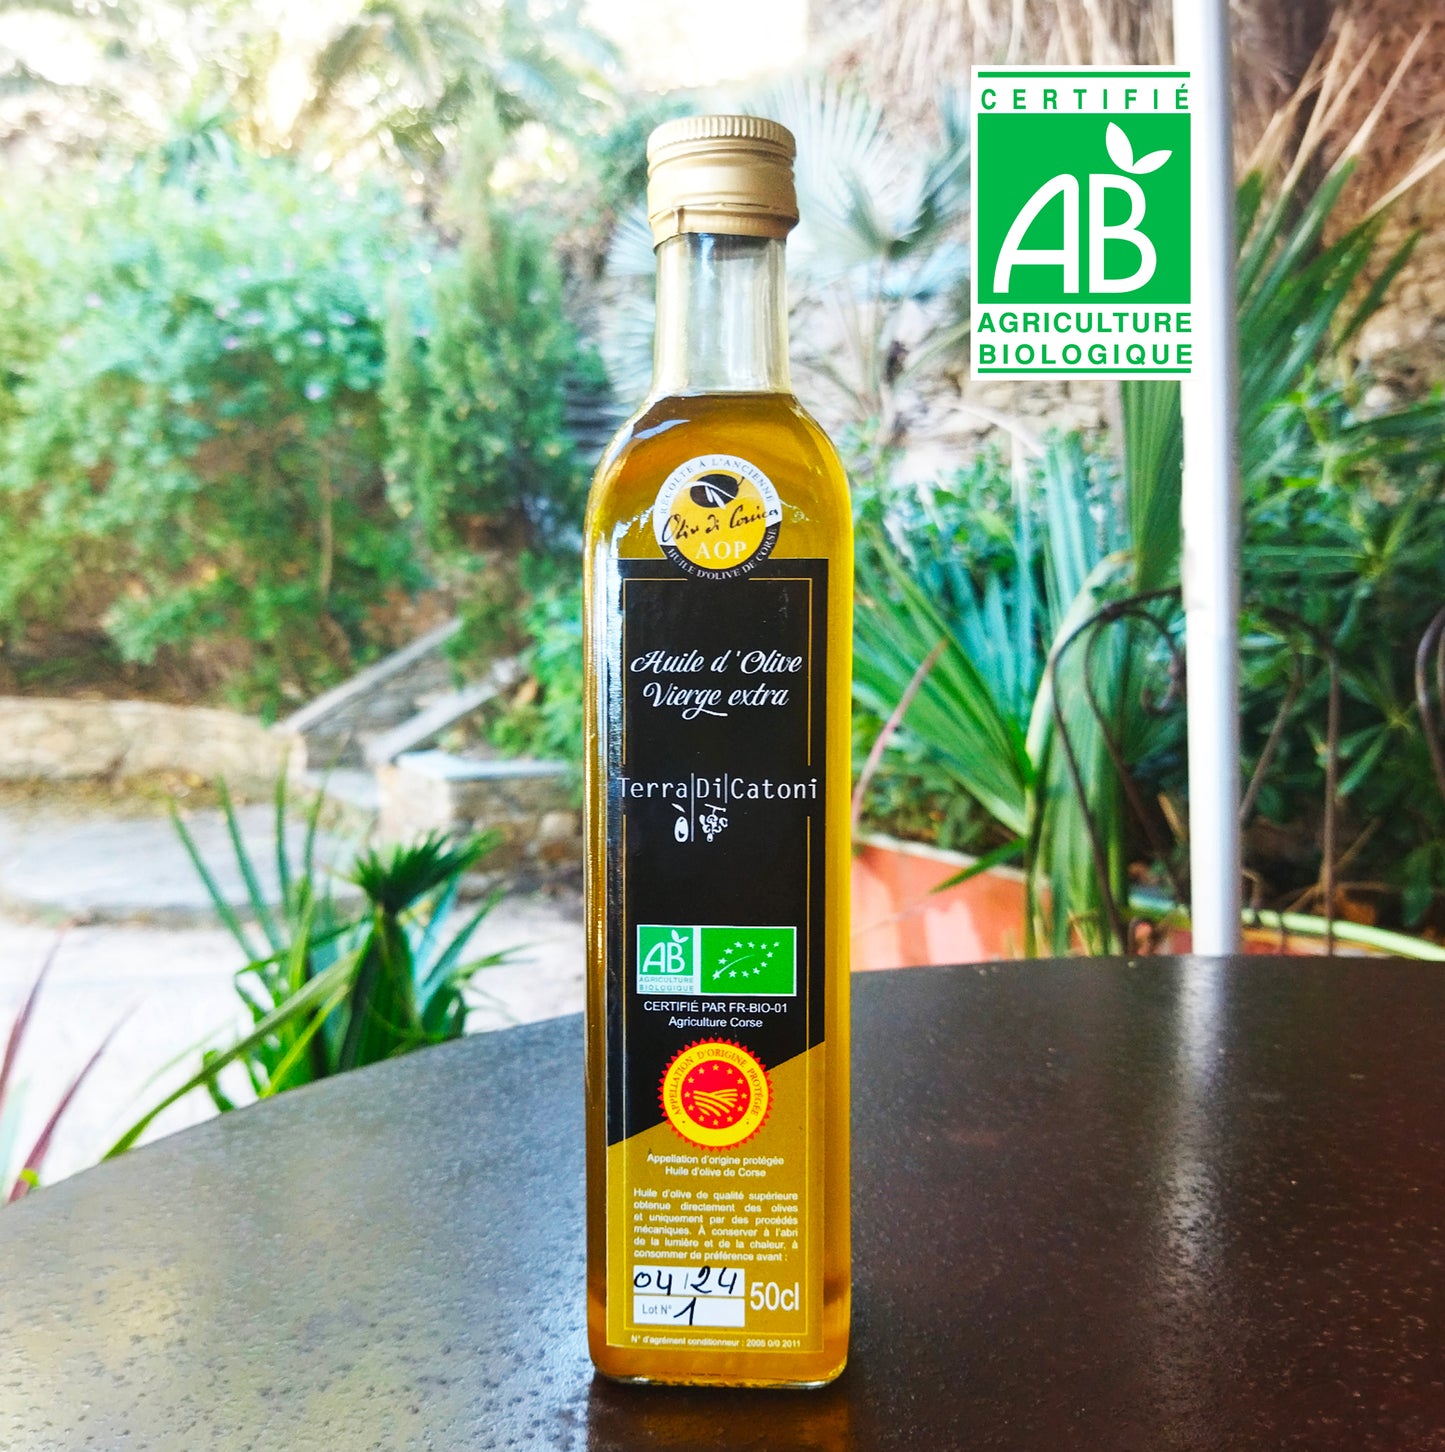 “Ripe fruity” Corsican olive oil (50cl)